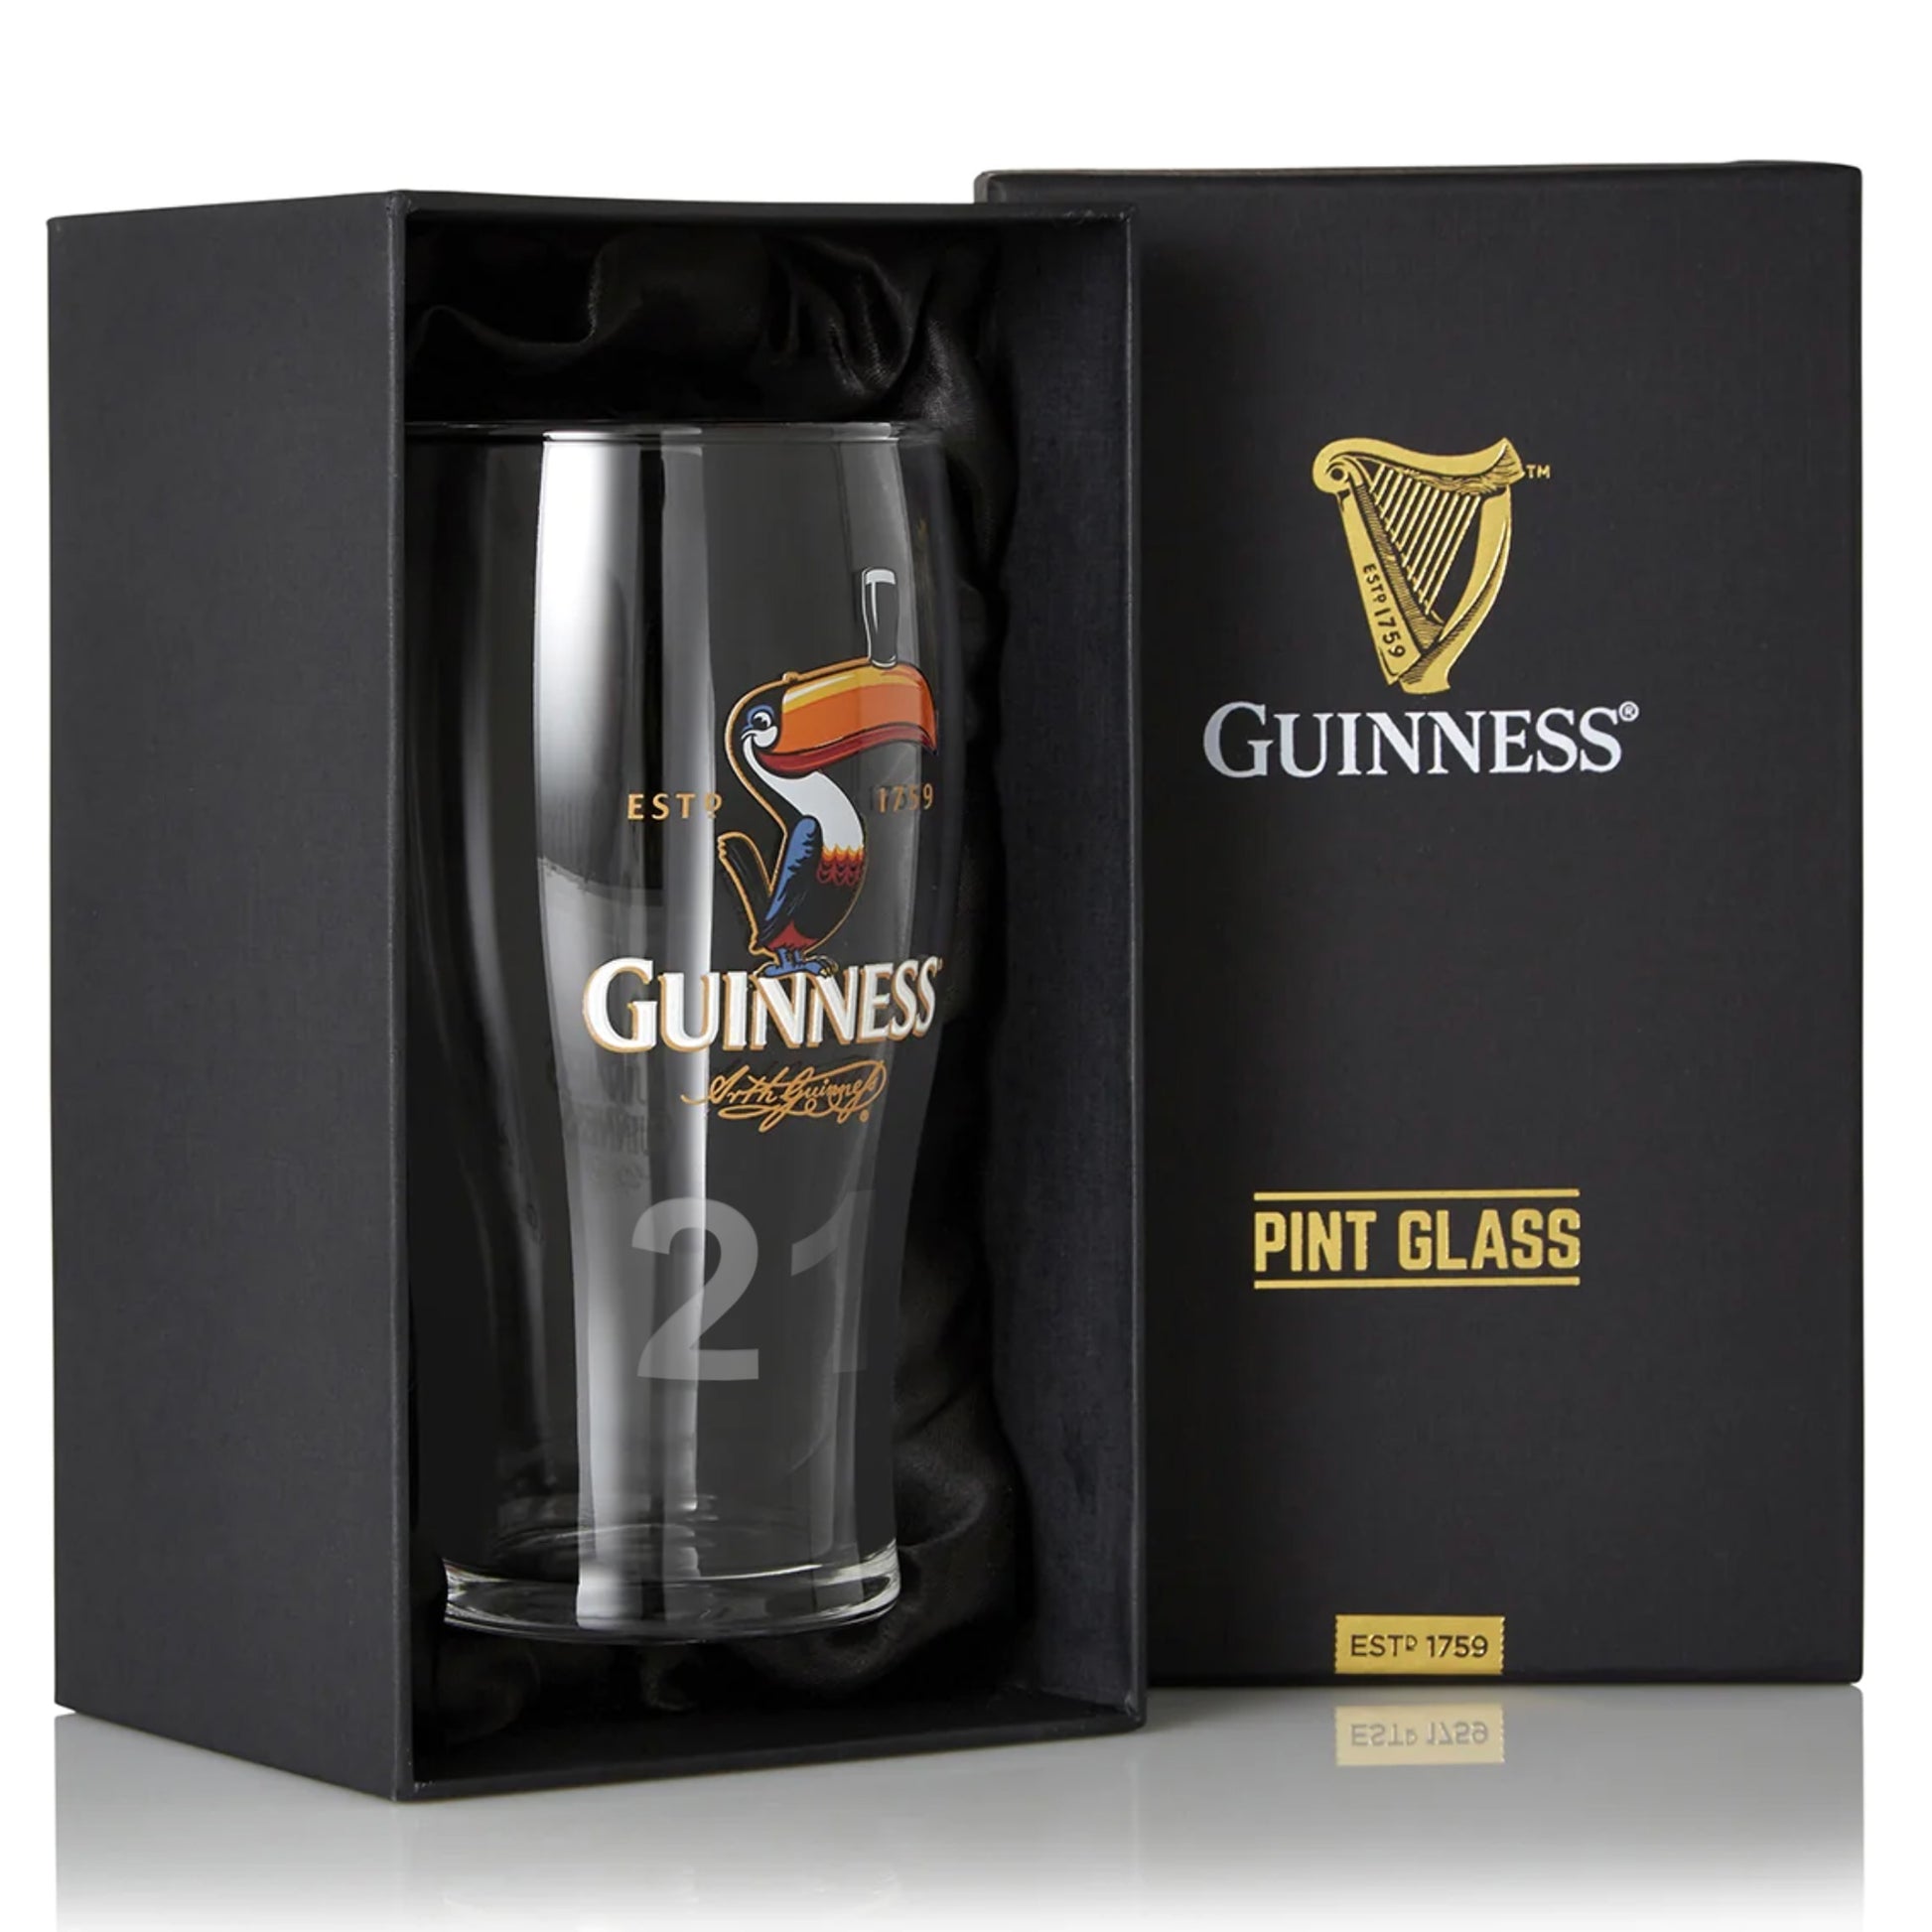 Branded Guinness Toucan Pint Glass in a box.